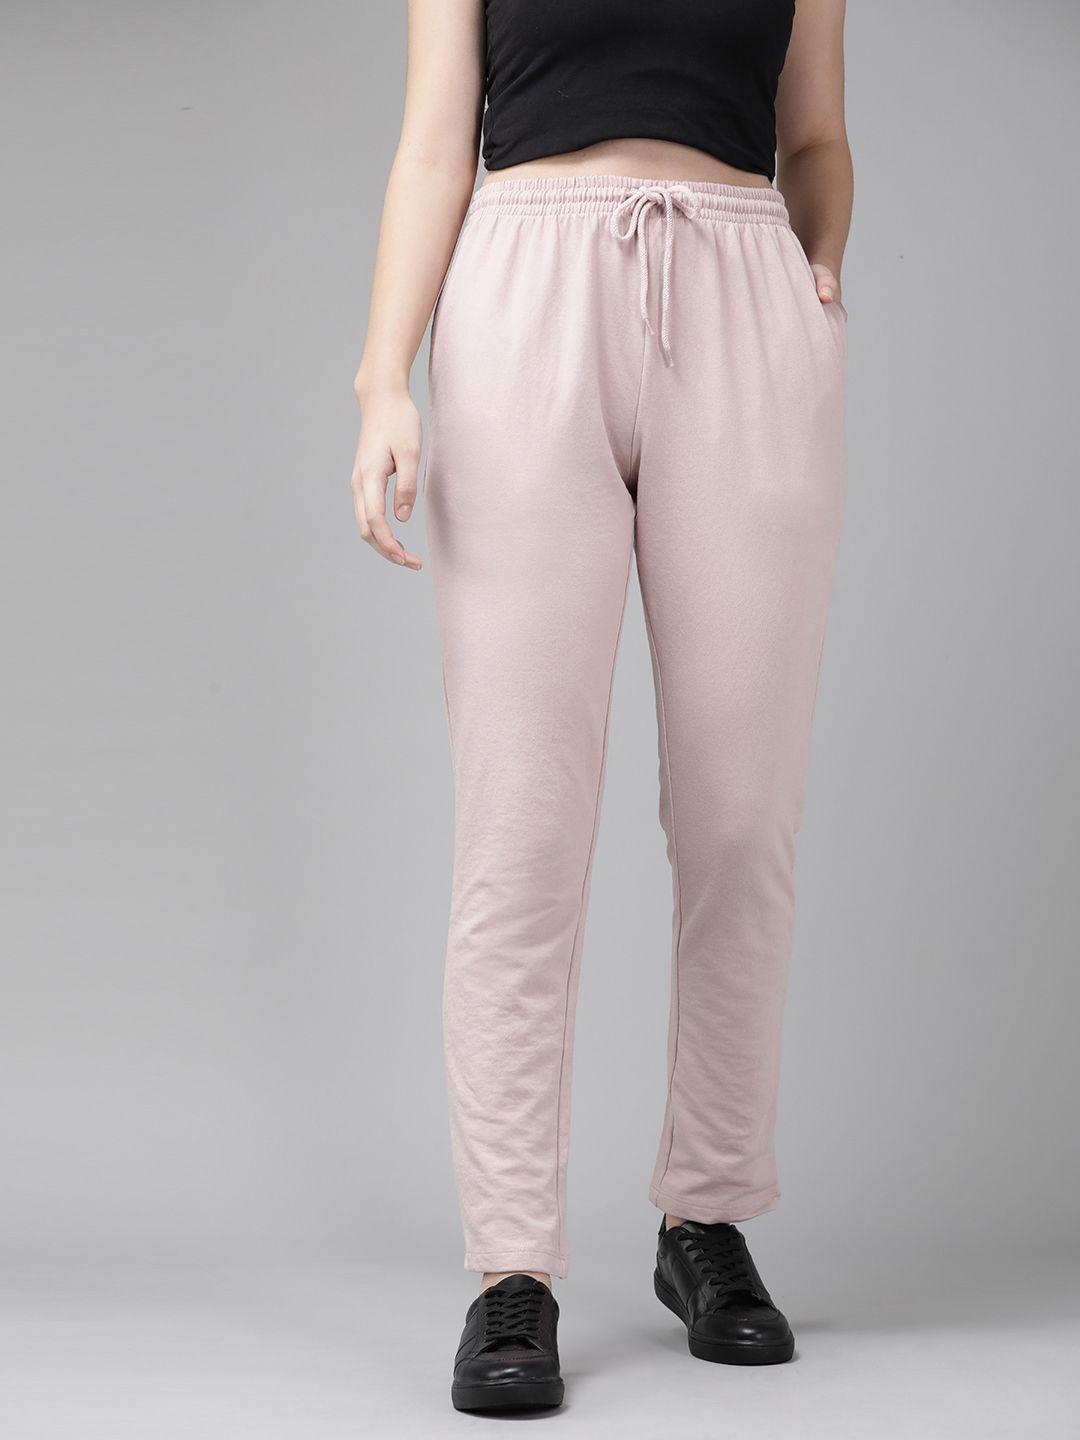 Roadster Women Pink Solid Track Pants